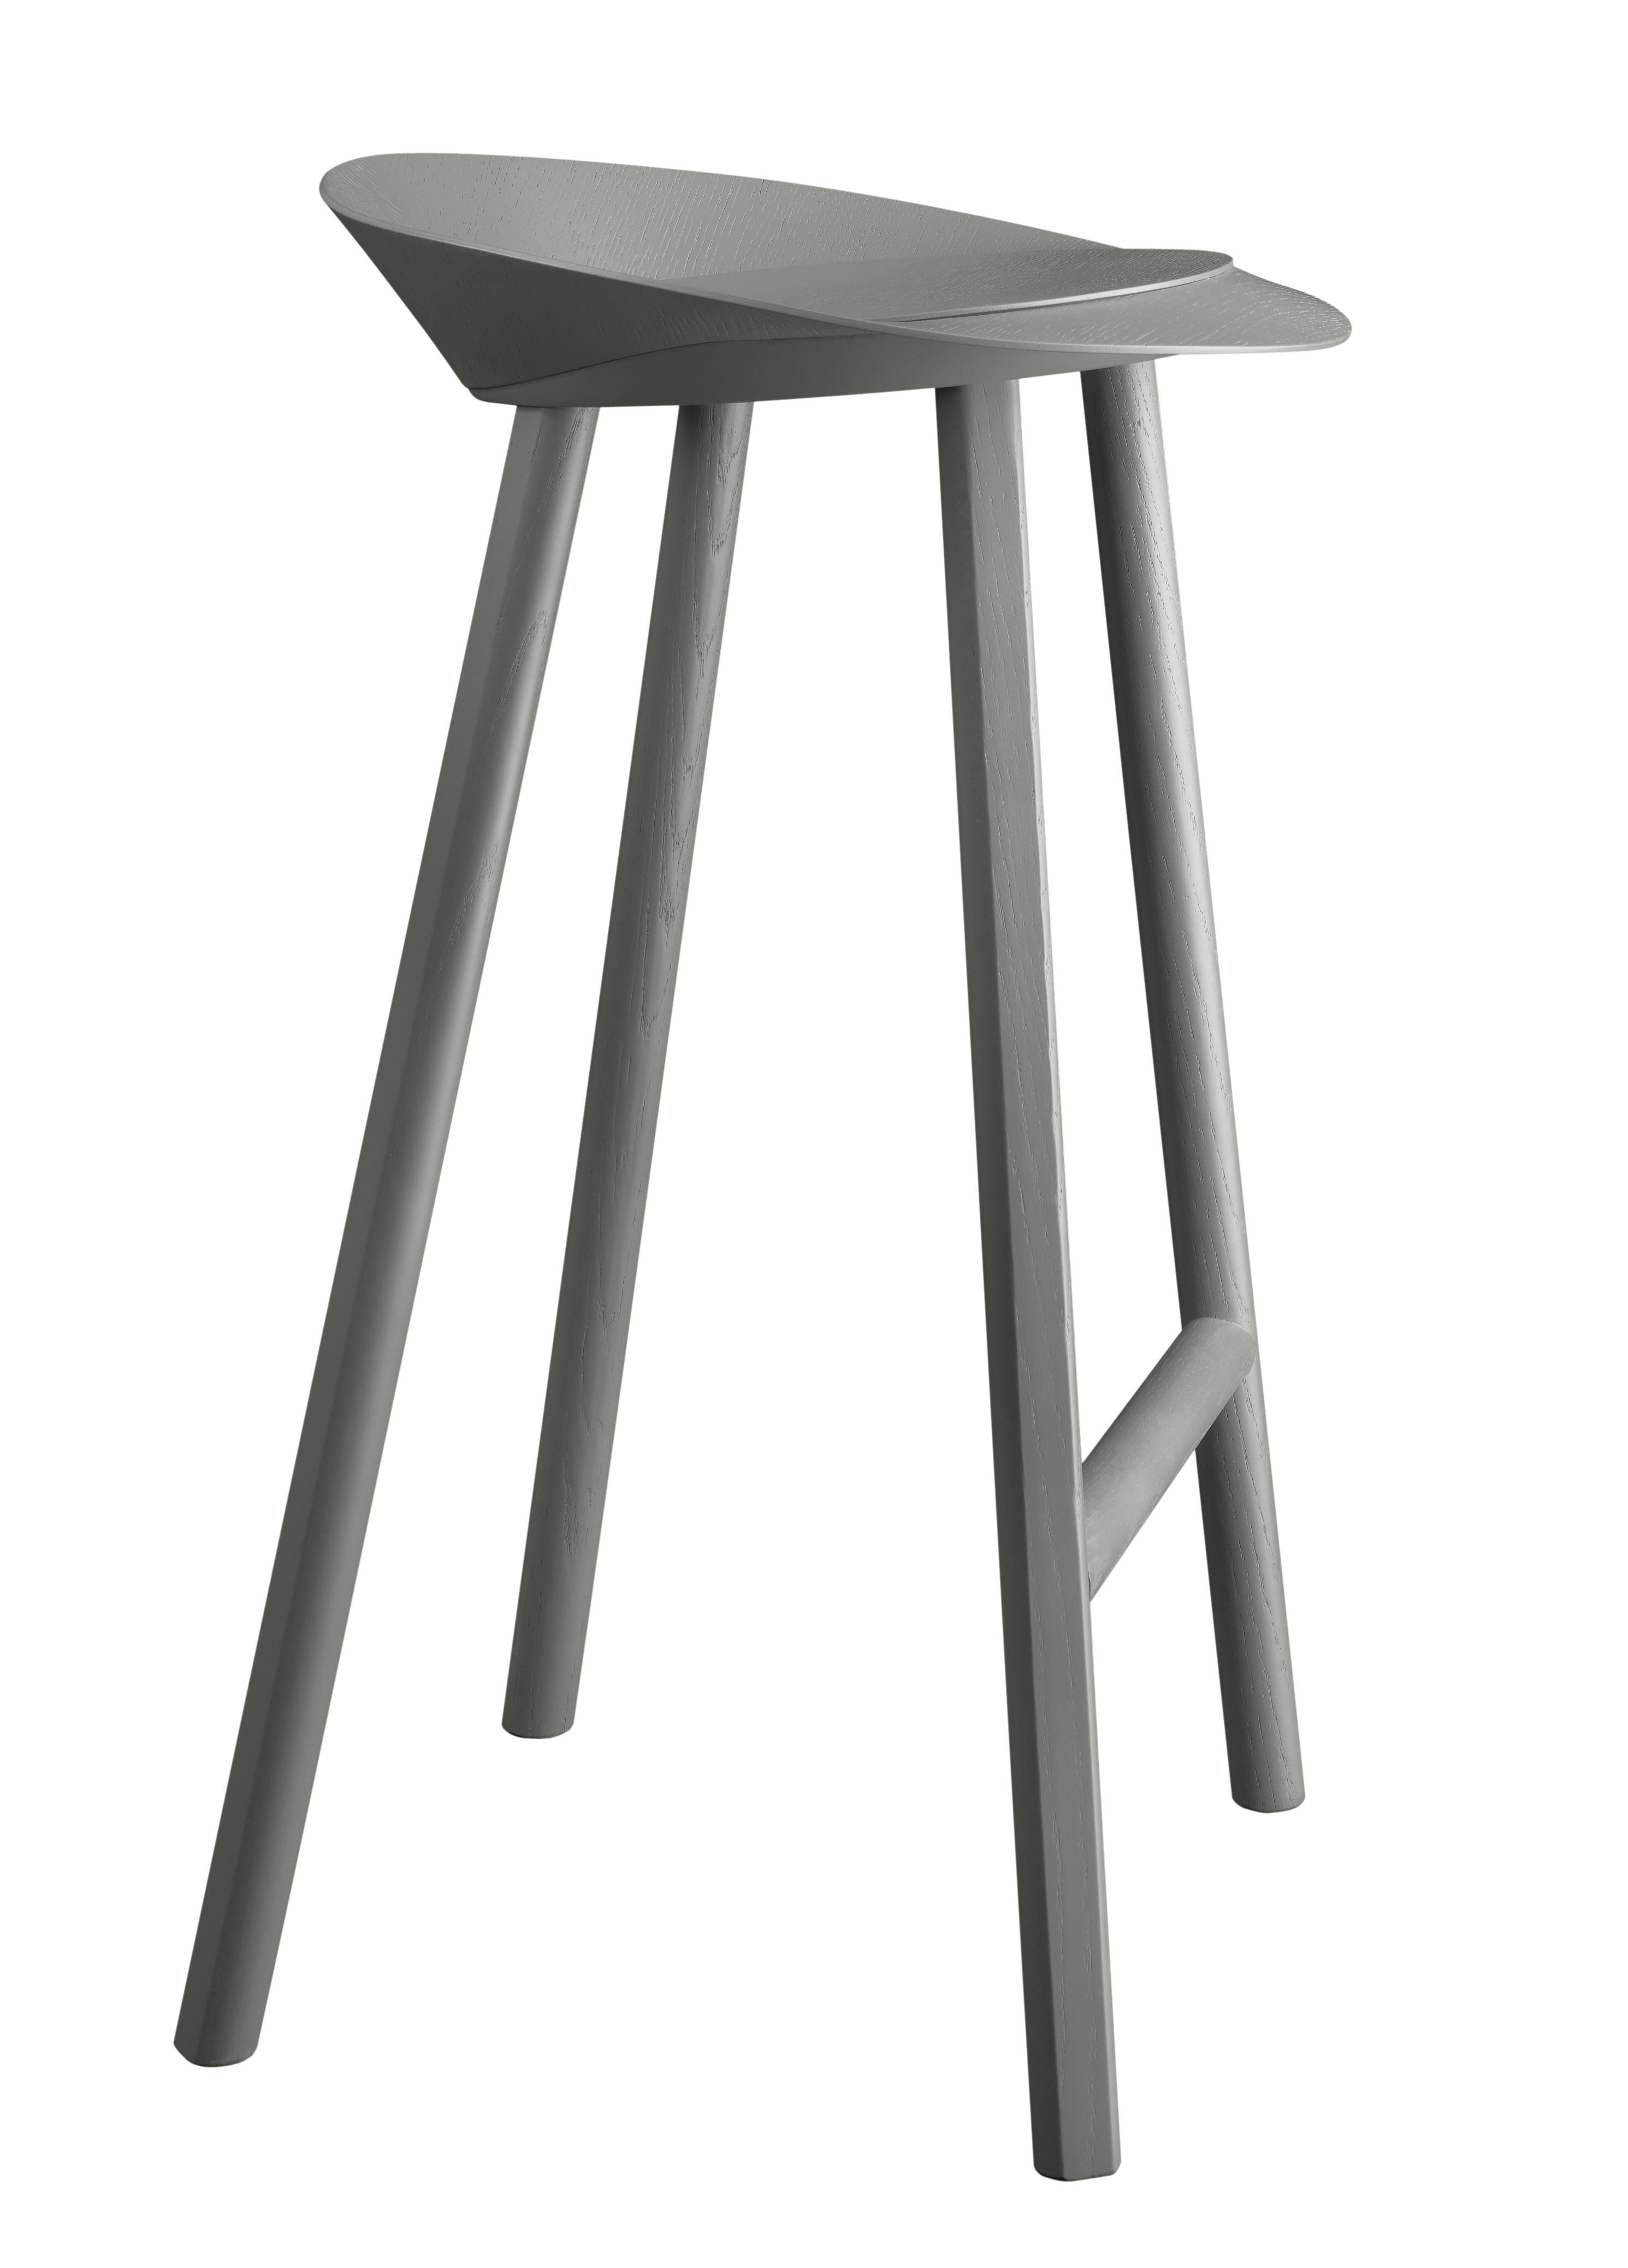 For Sale: Gray (Umbra Gray Lacquer) e15 Jean Stool Wood by Stefan Diez